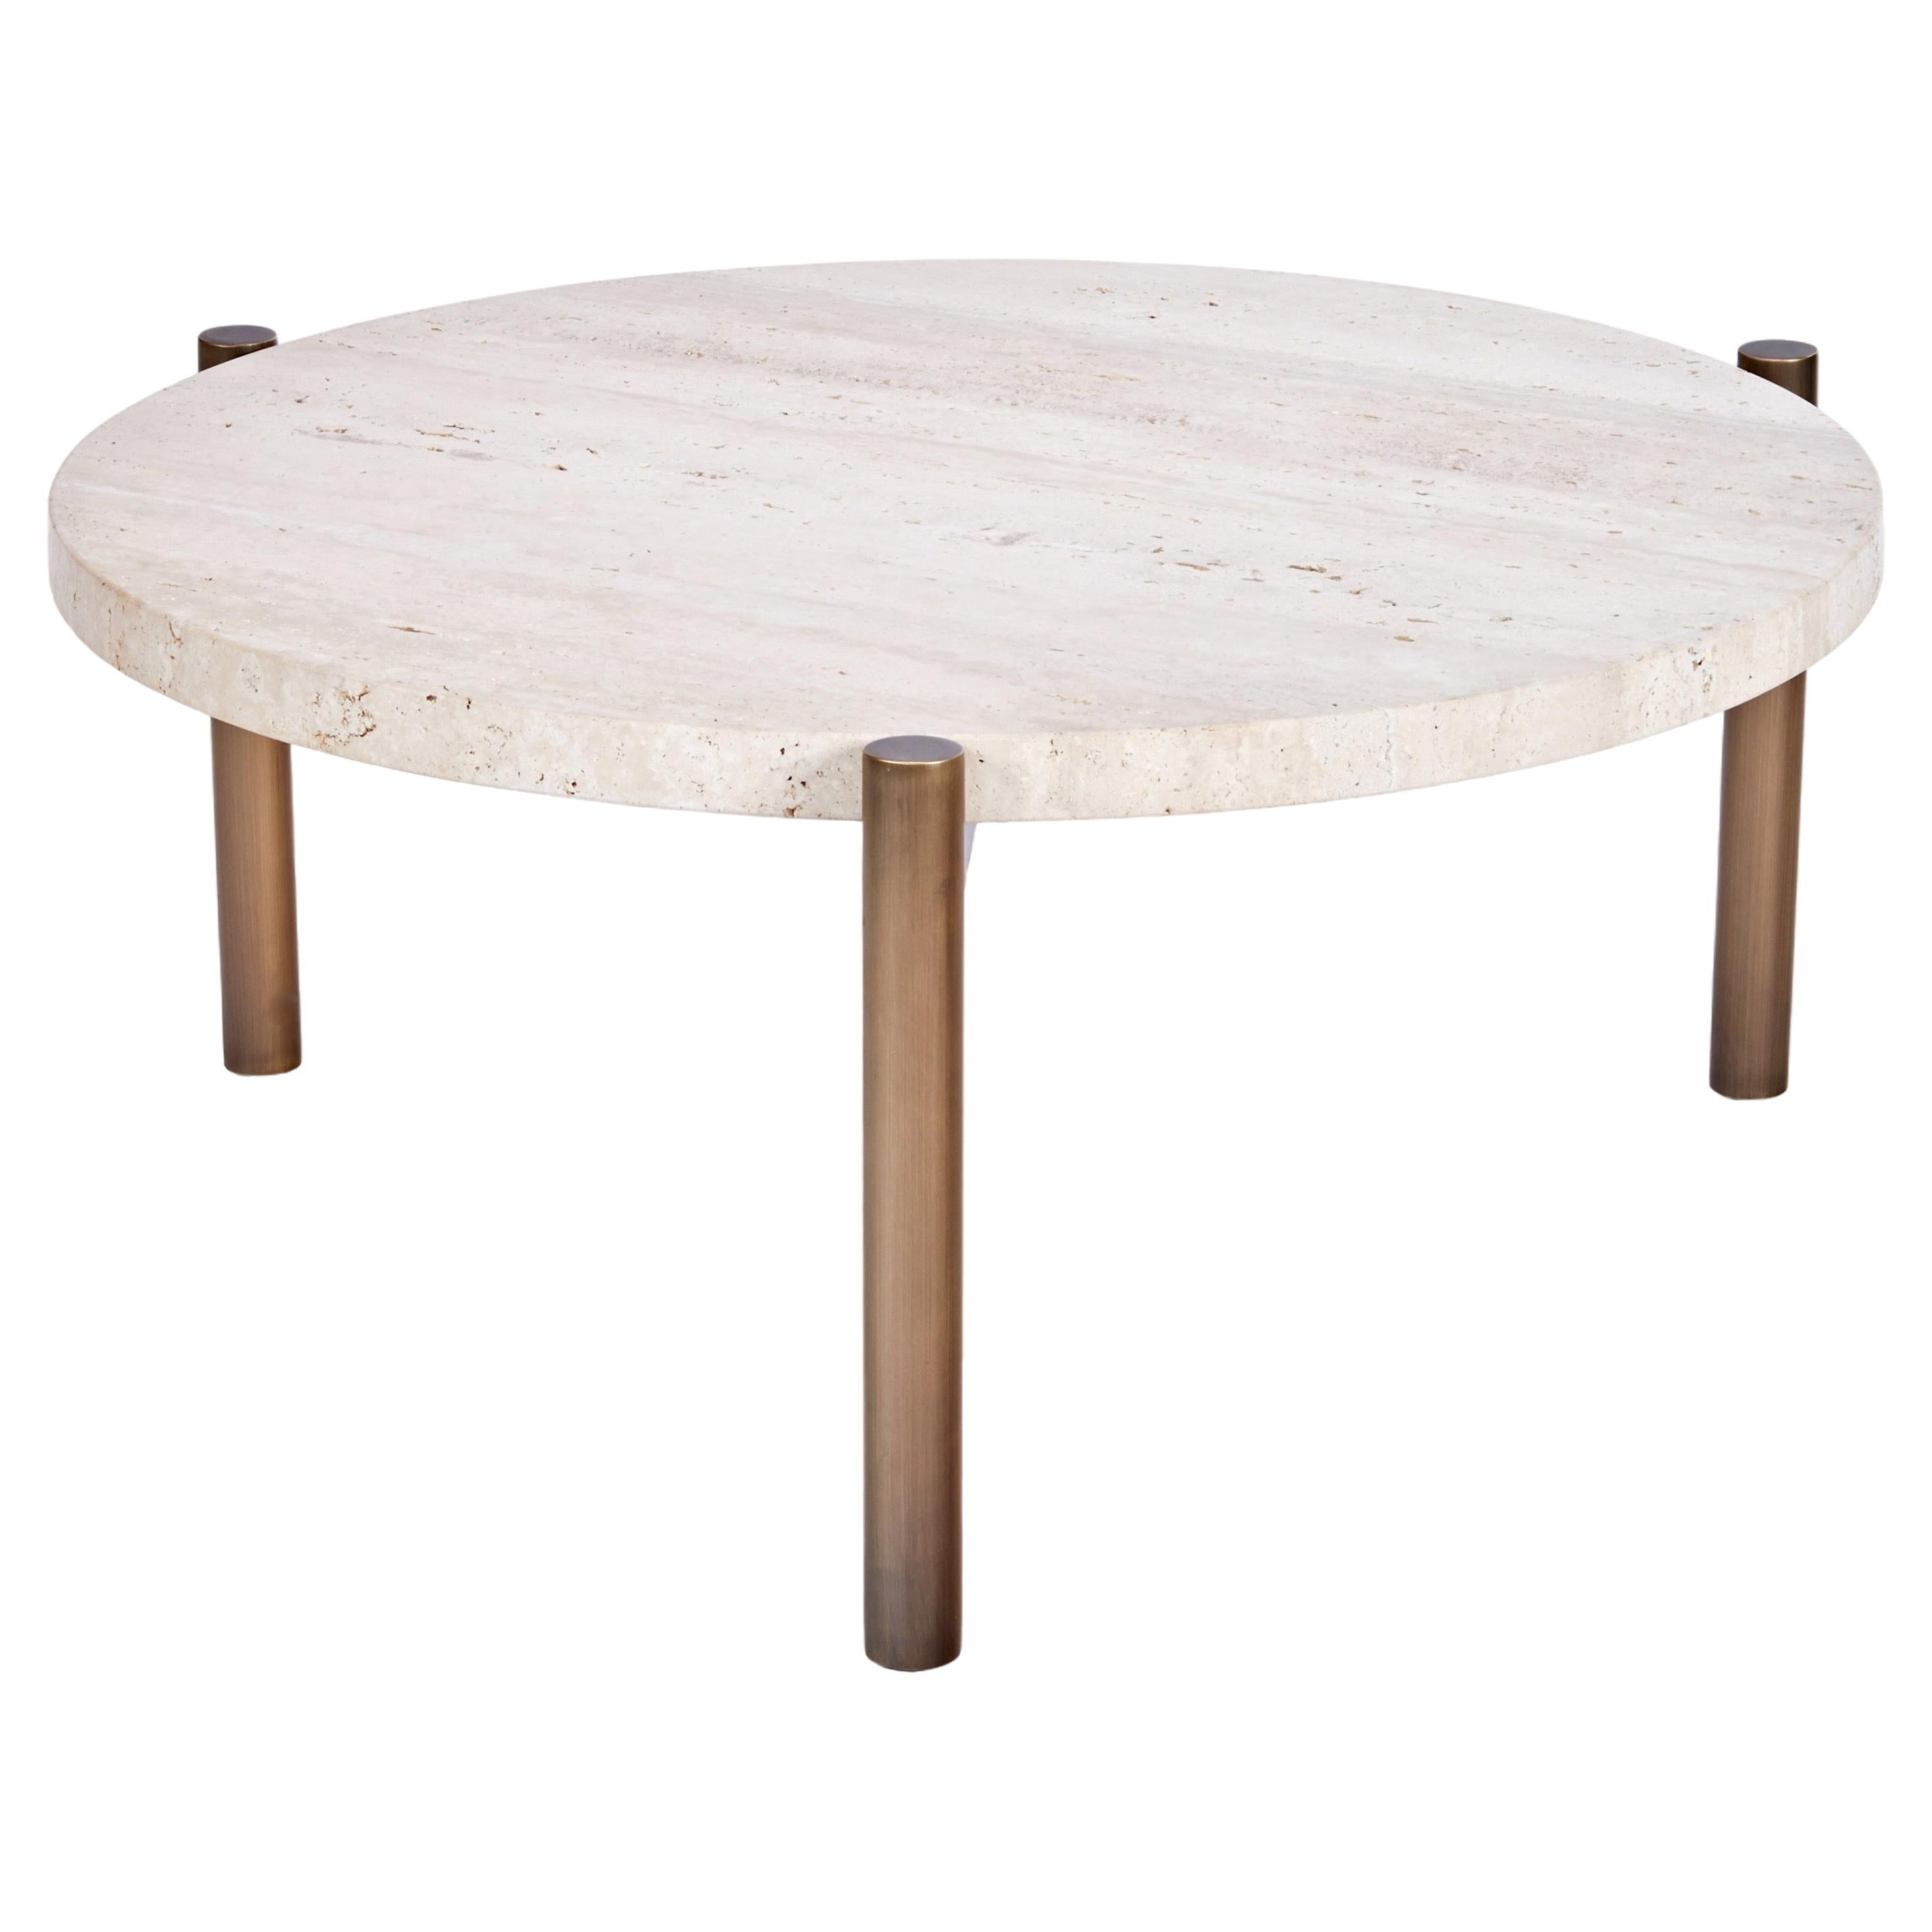 Tivoli Side Table Round 26 "D 3 Legs Burnished Brass Plated Base + Travertine Top